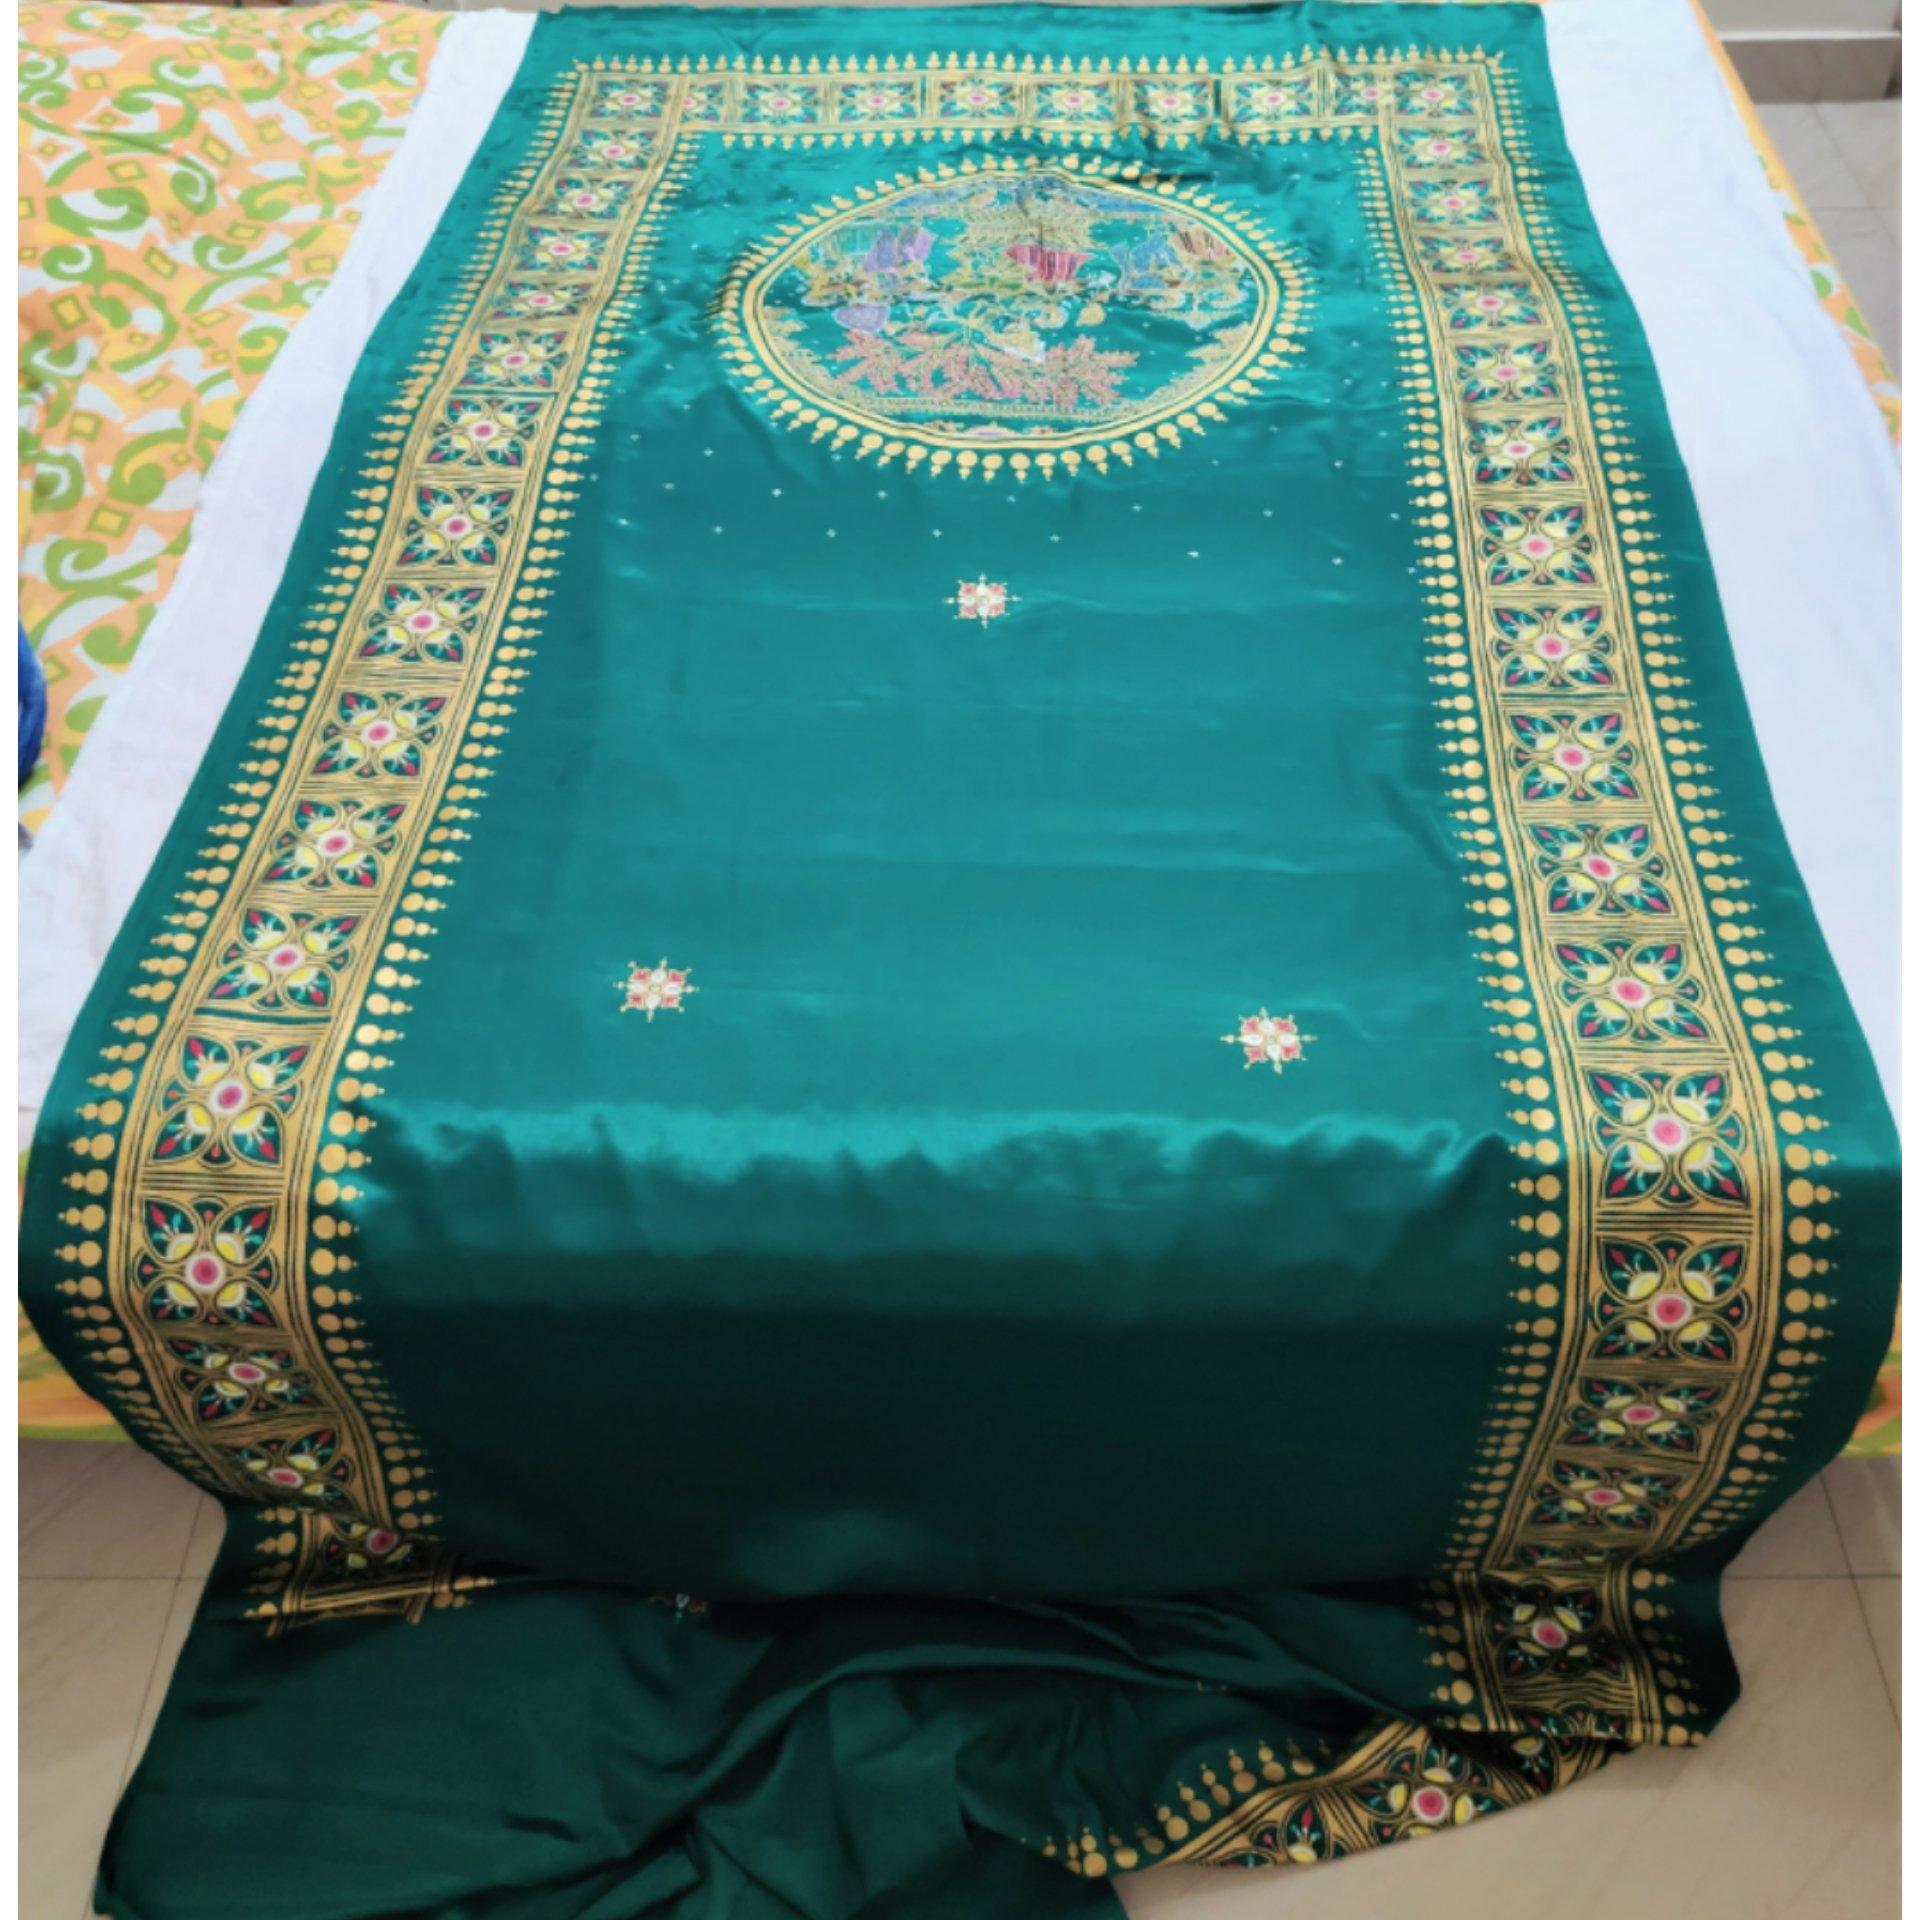 Green Satin Saree with handpainted Pattachitra art - Crafts Collection